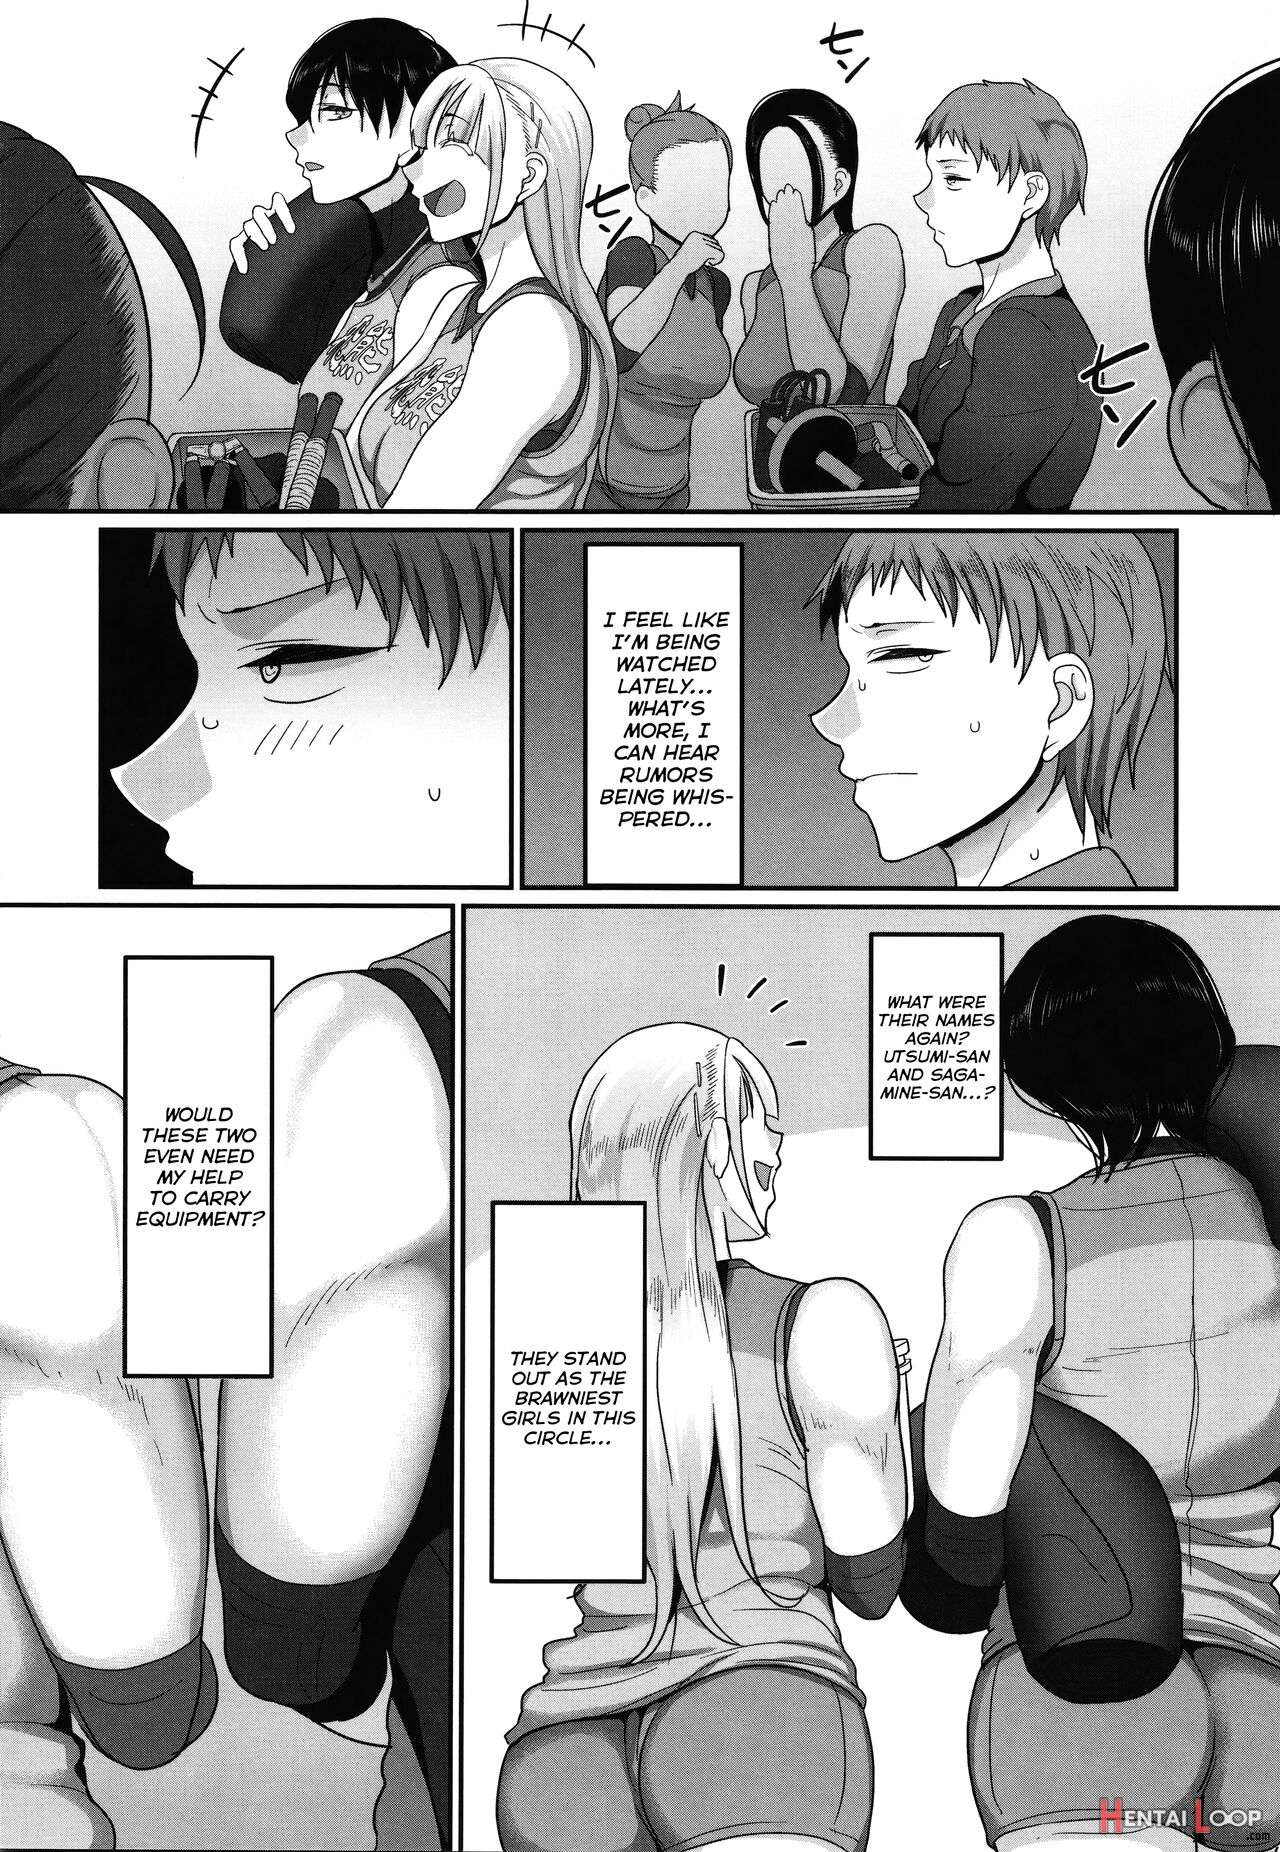 Affairs Of The Women's Volleyball Circle Of K City, S Prefecture 1 page 120